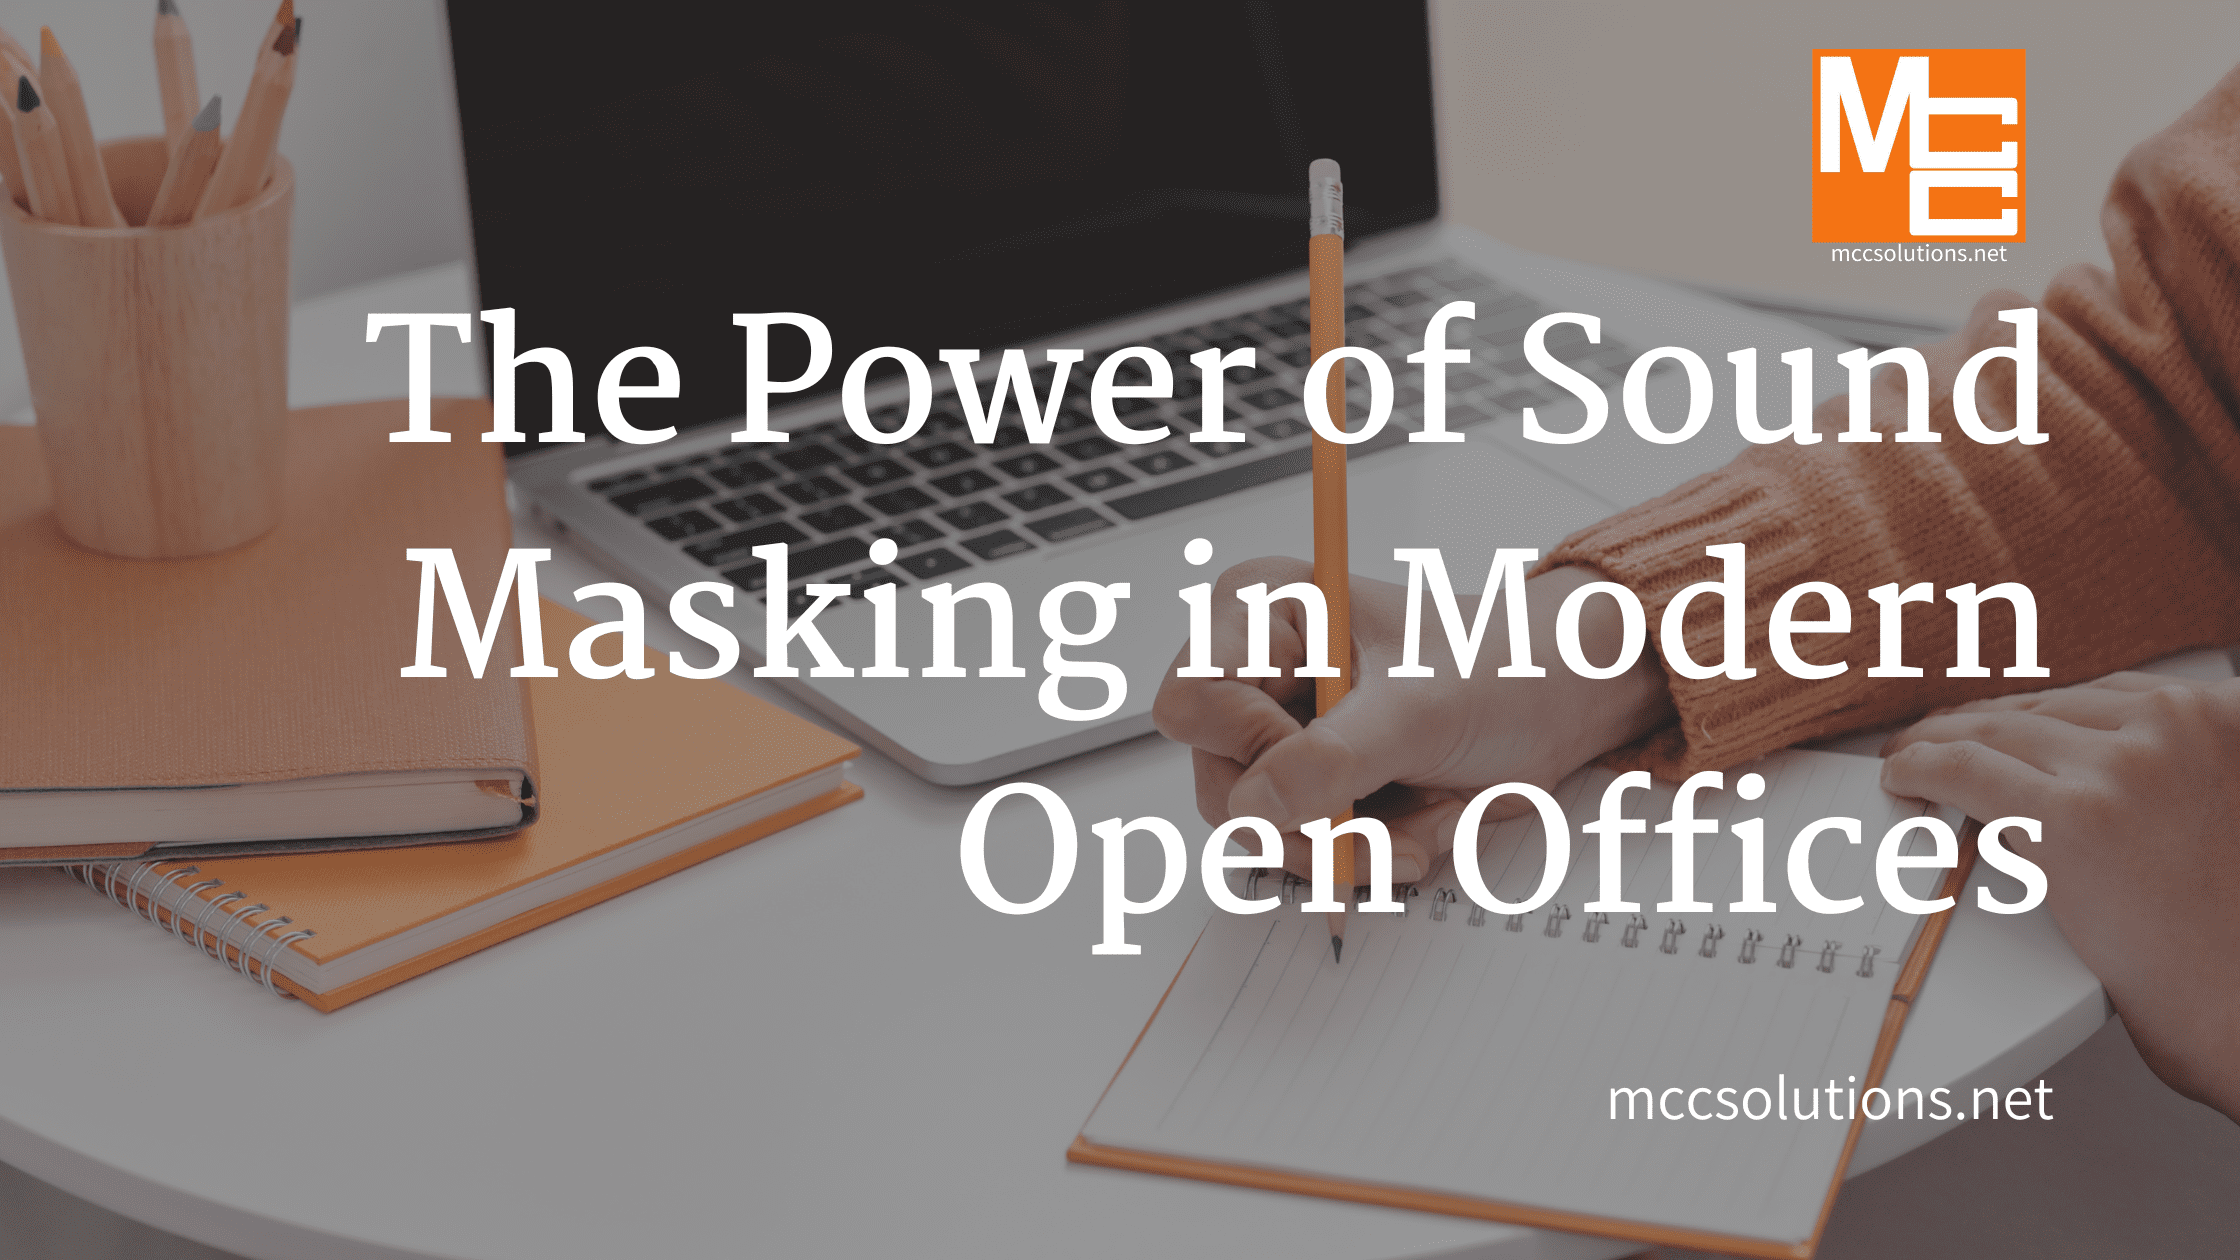 The Power of Sound Masking in Modern Open Offices